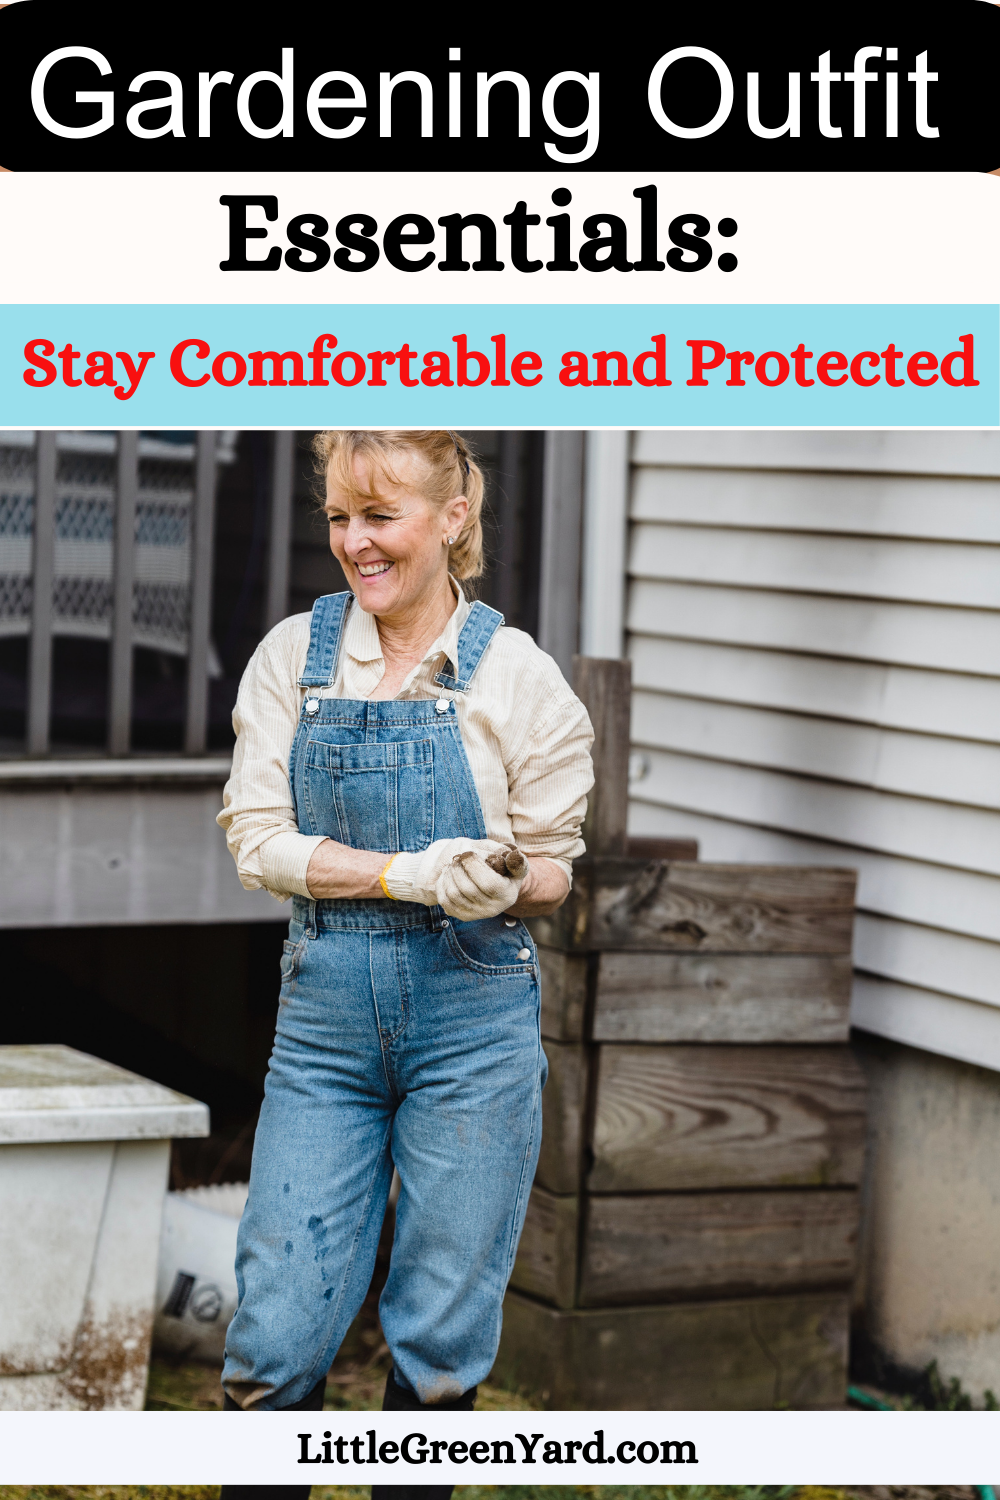 Gardening Outfit Essentials: Stay Comfortable and Protected